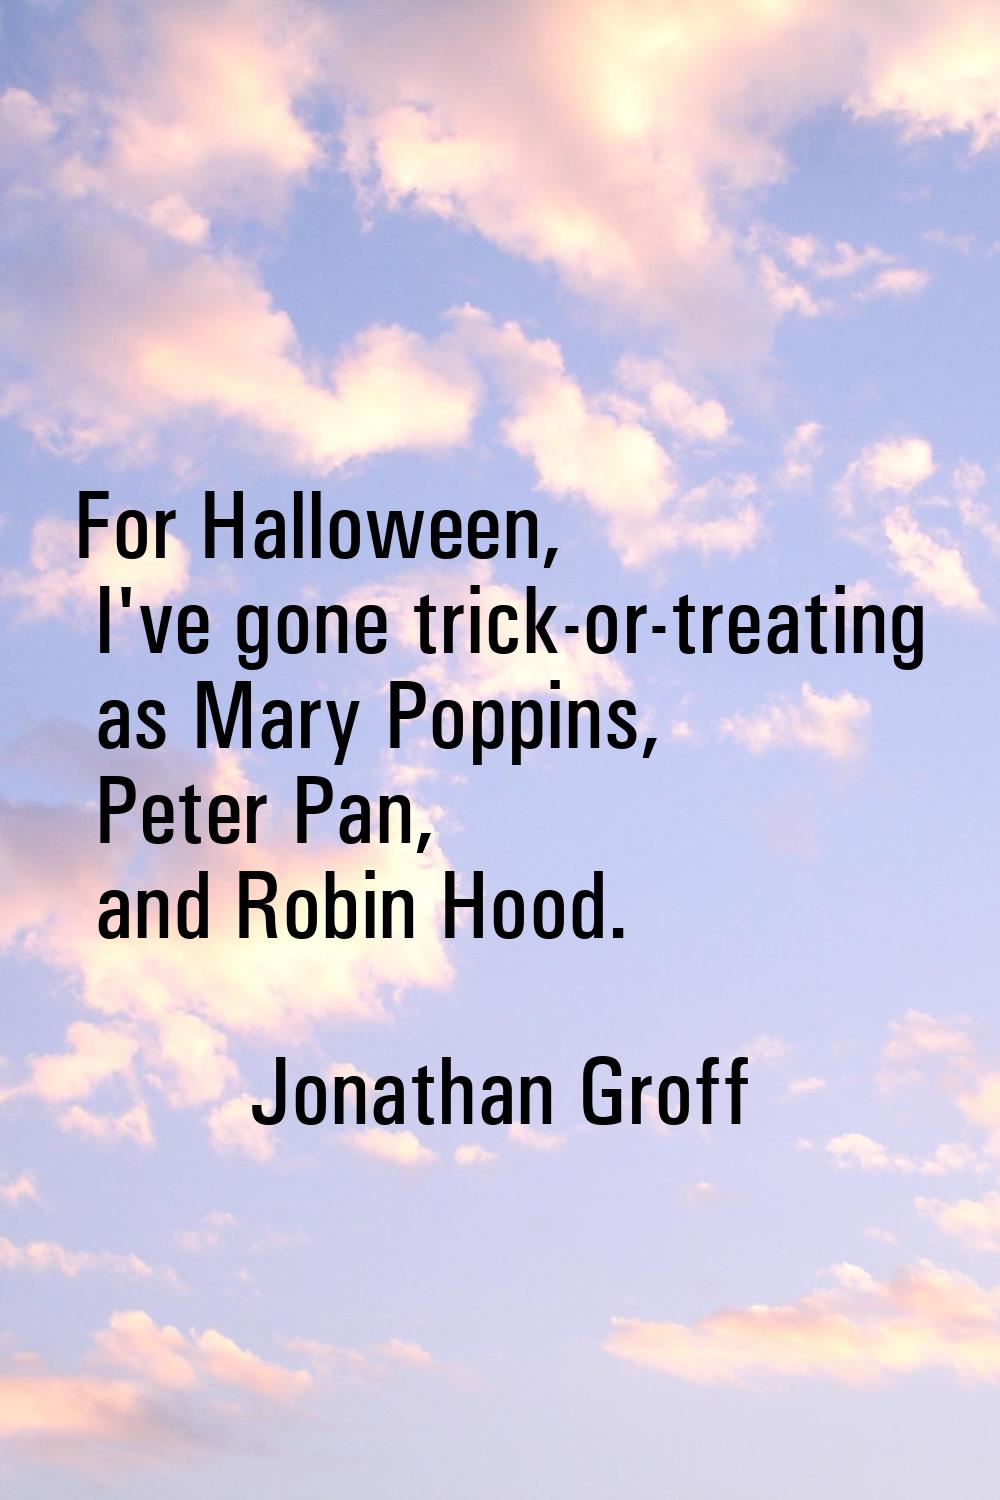 For Halloween, I've gone trick-or-treating as Mary Poppins, Peter Pan, and Robin Hood.